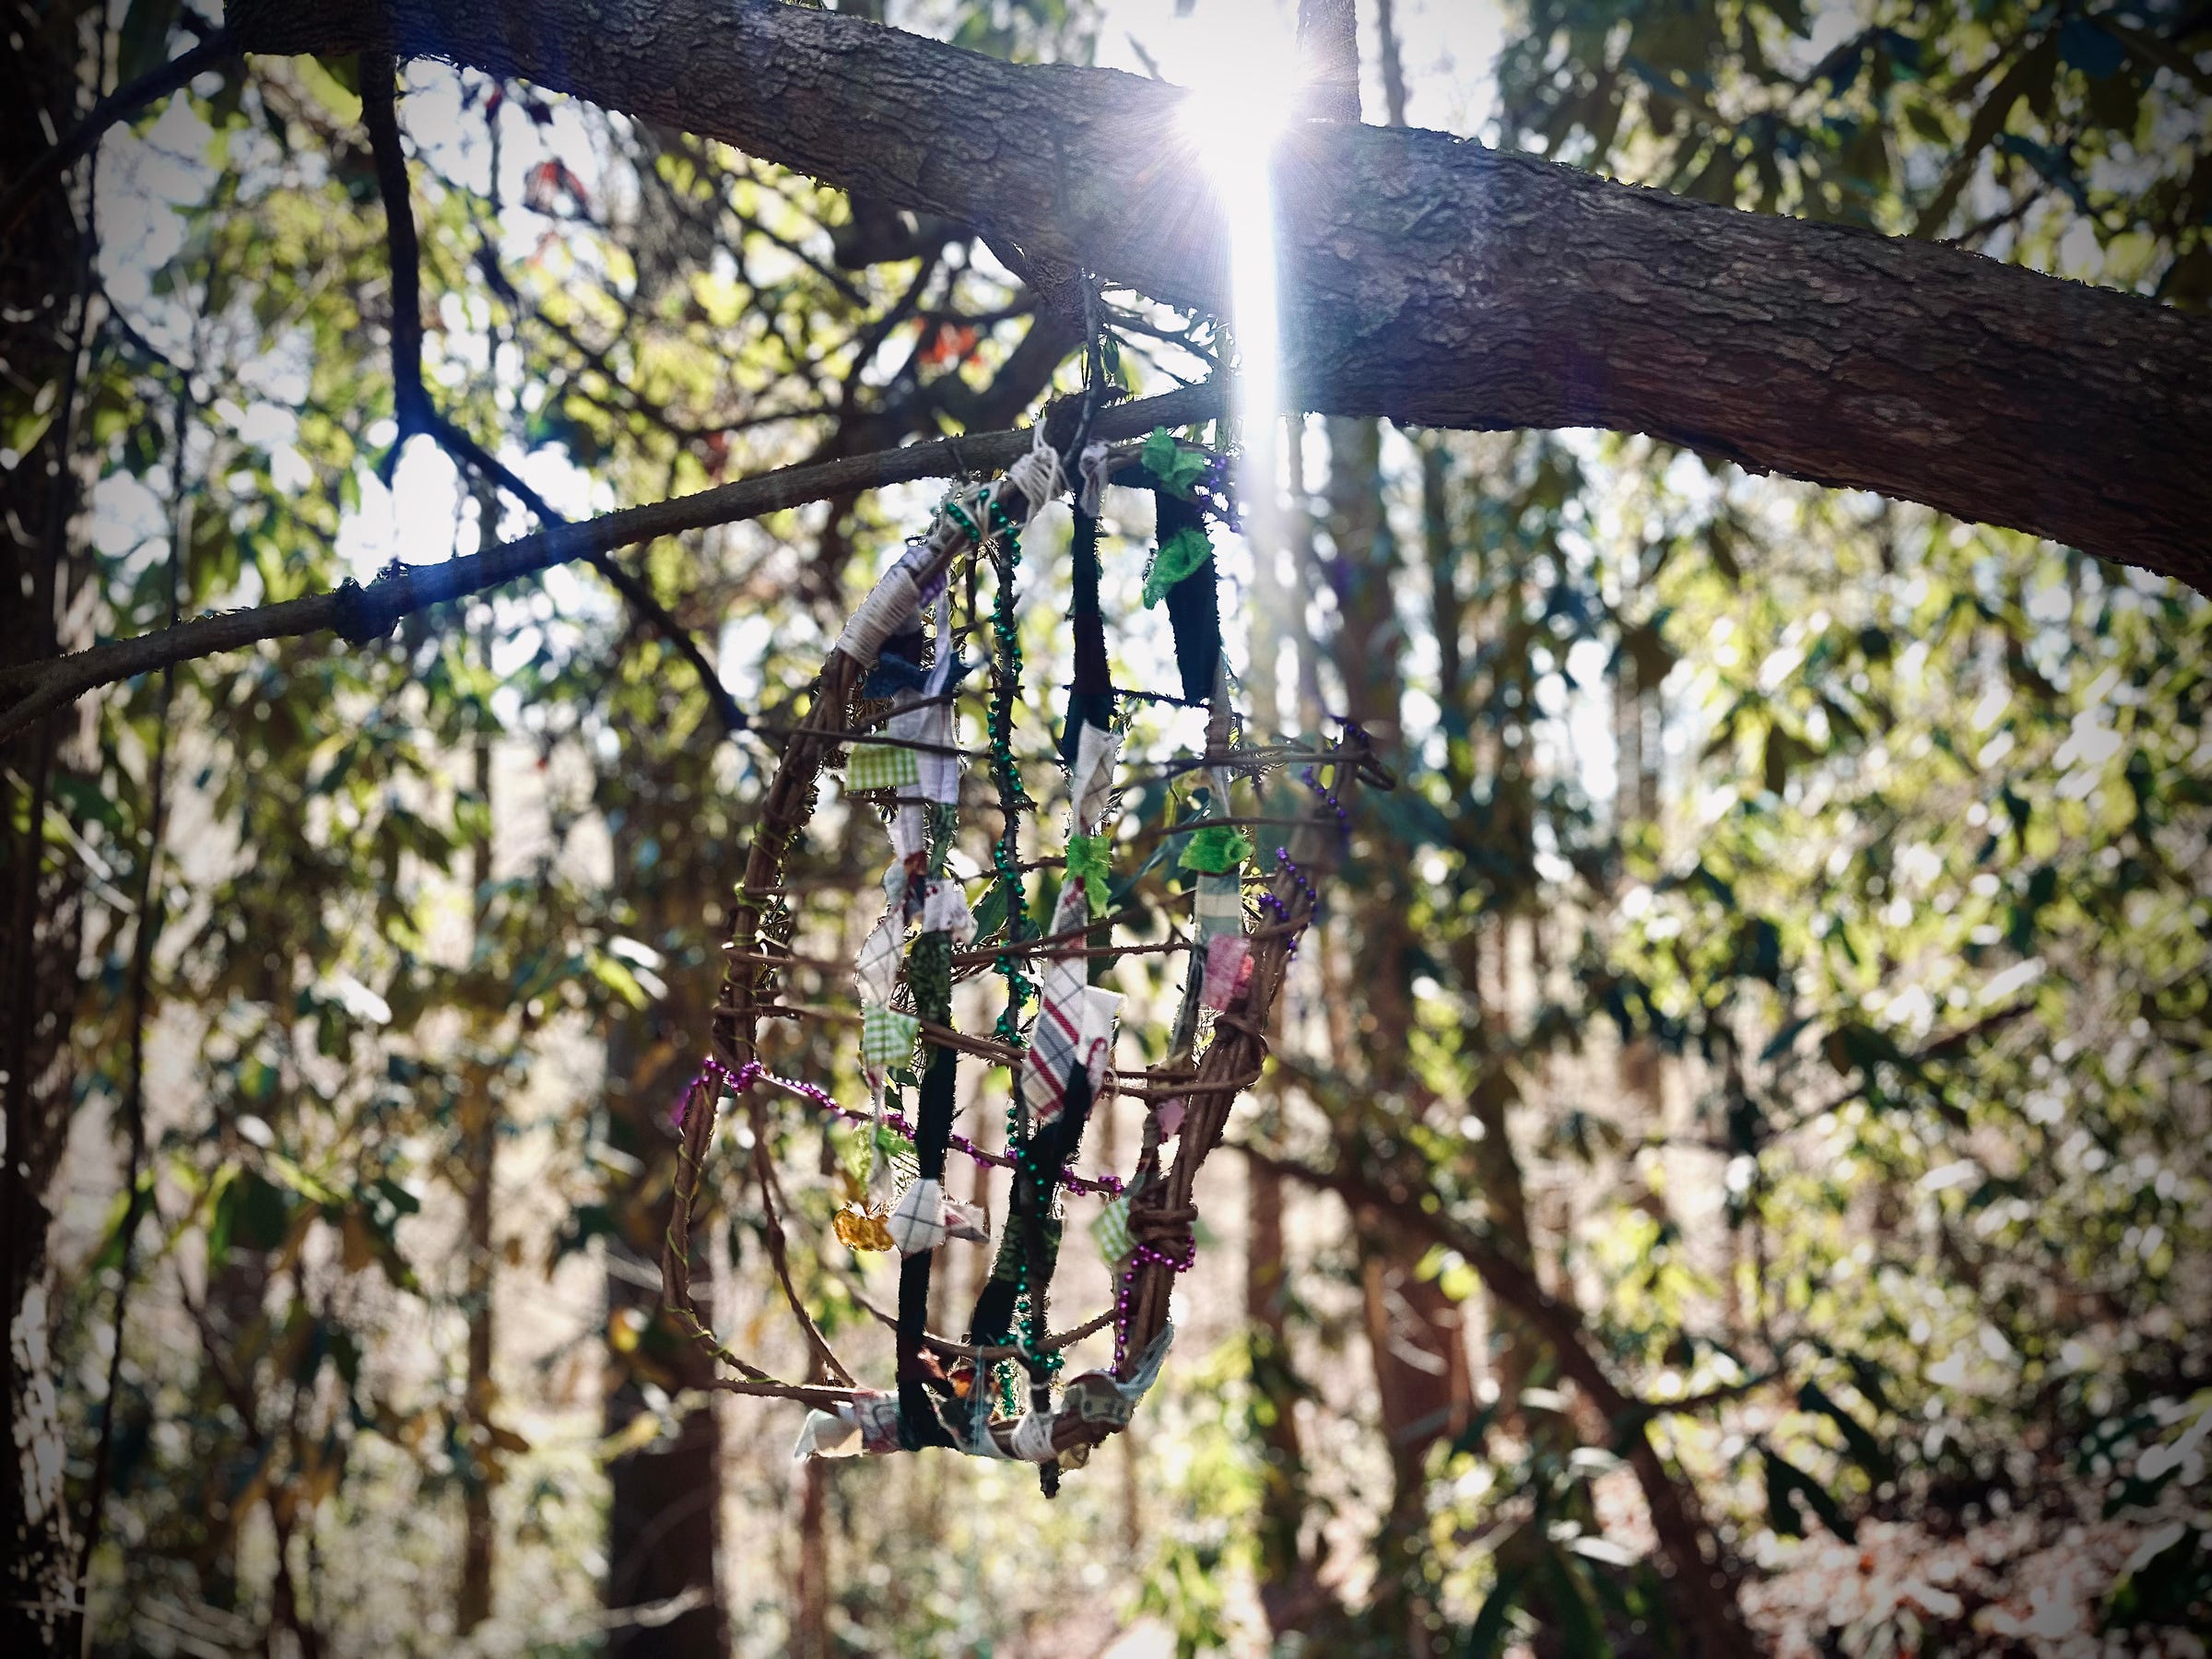 A weird kinda True Detective looking piece of "art" made with kudzu root and fabric garland hangs from a branch in the forest